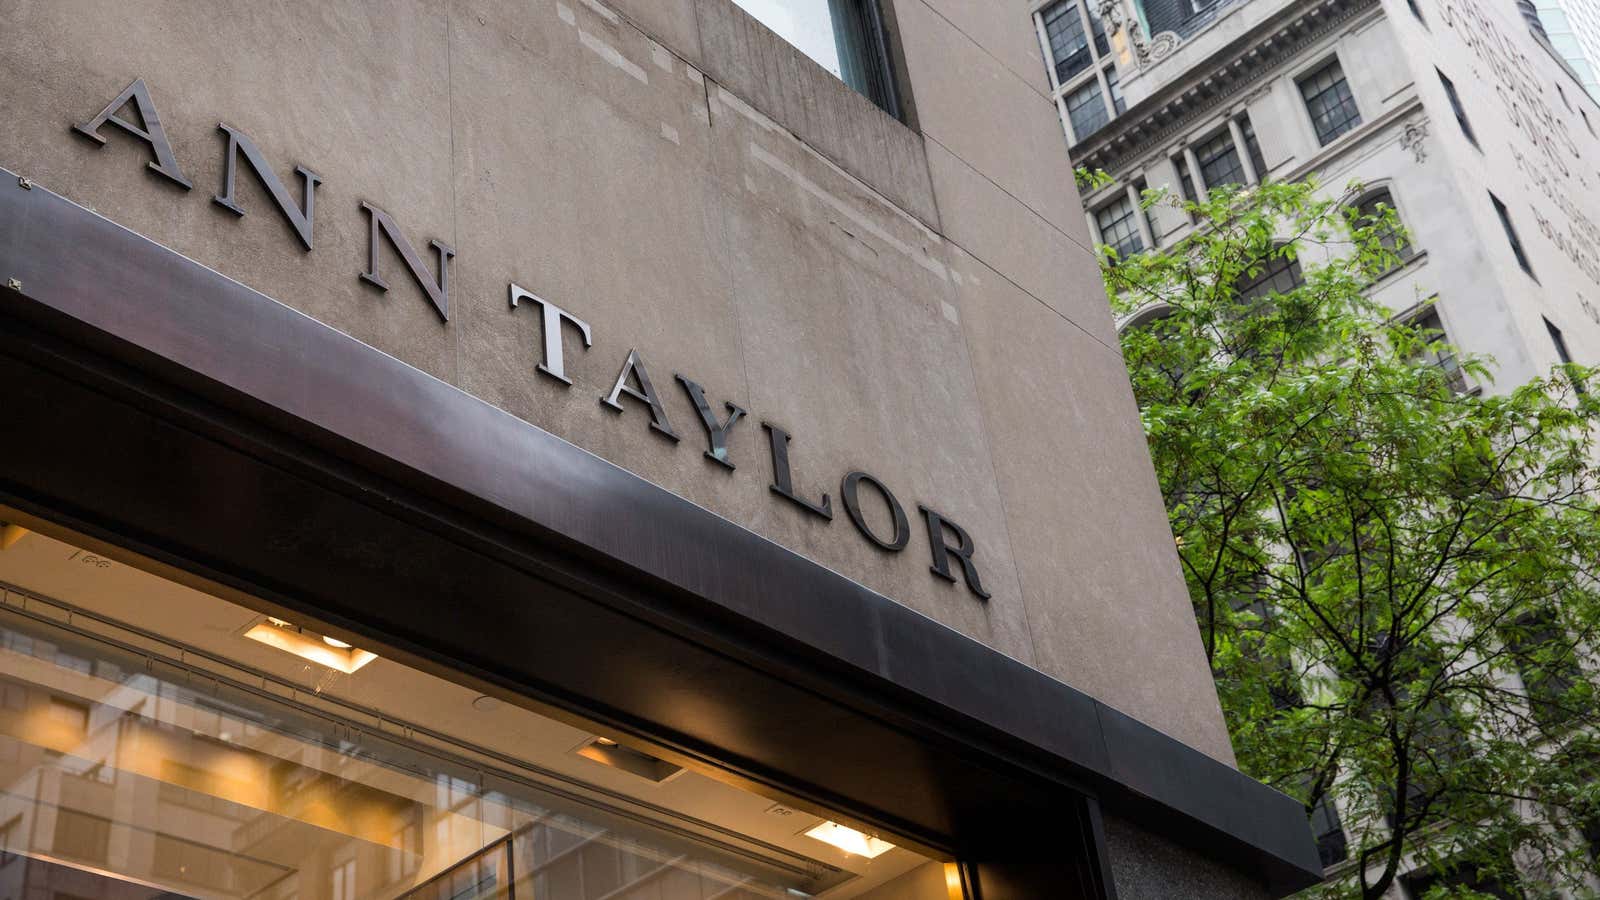 Ann Taylor fits nicely into Ascena Retail Group’s audience of professional suburban women.